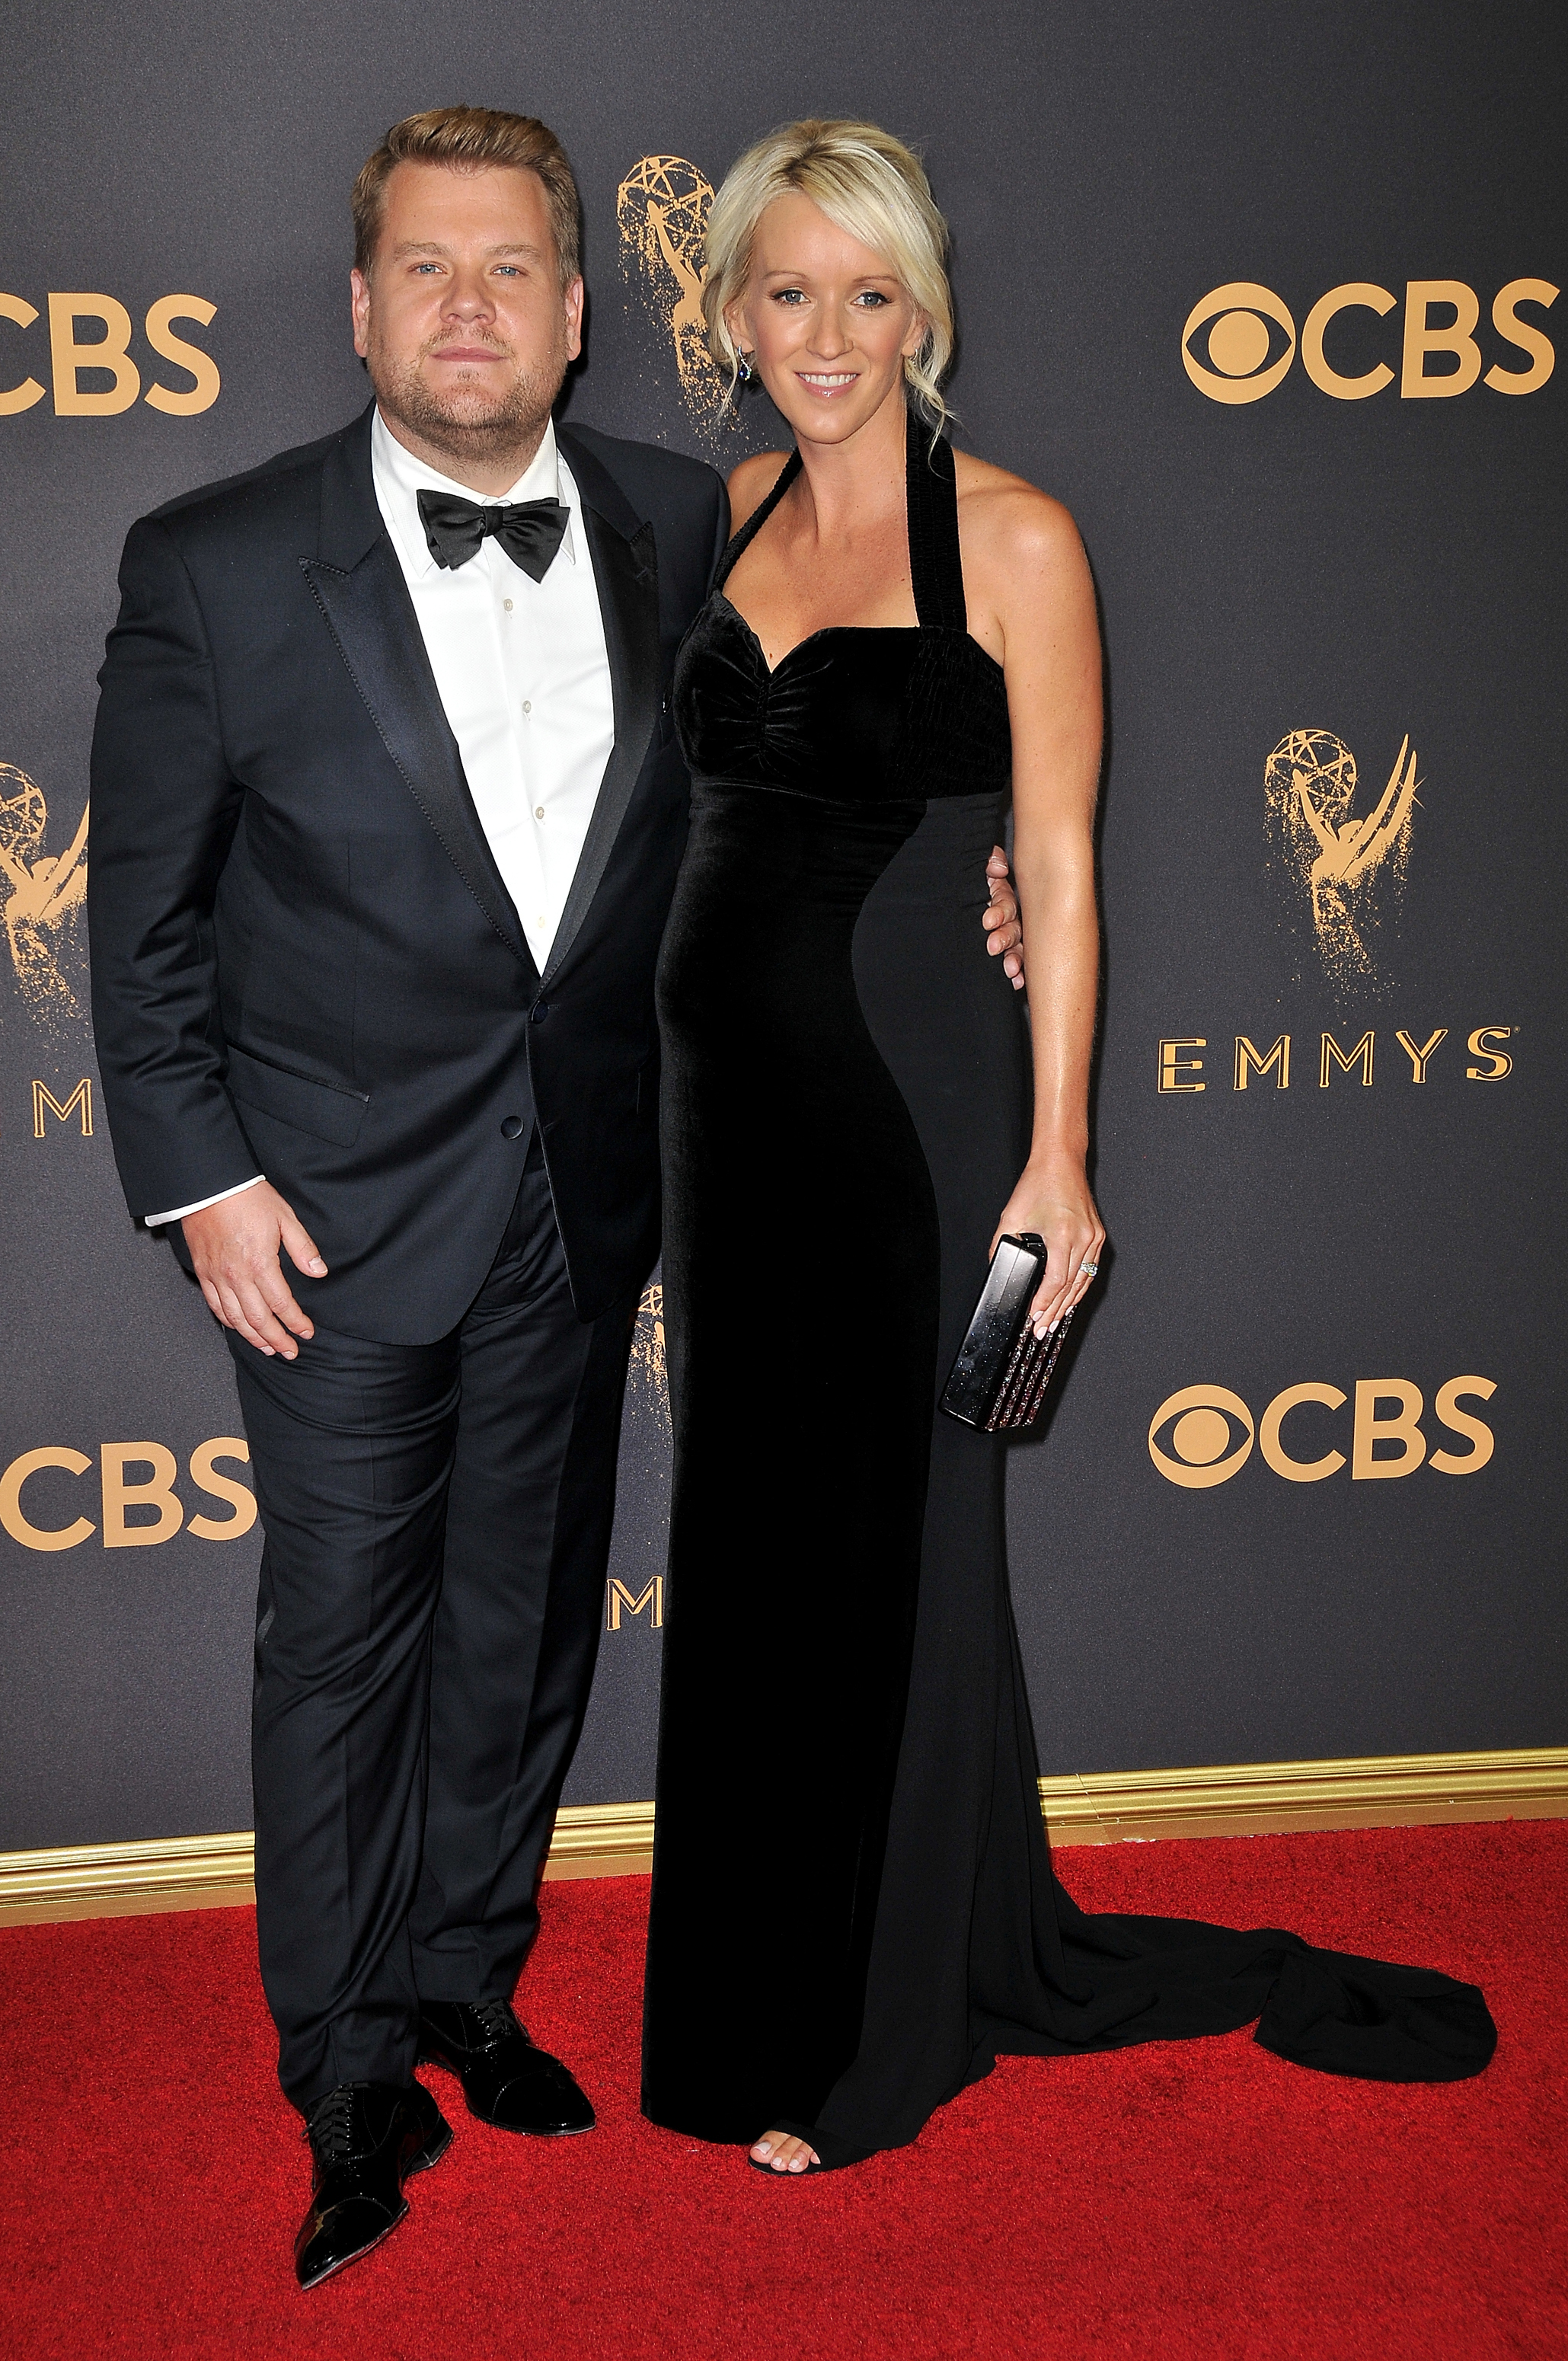 Its Gonna Be Terrific James Corden Reveals He And His Wife Are Having 